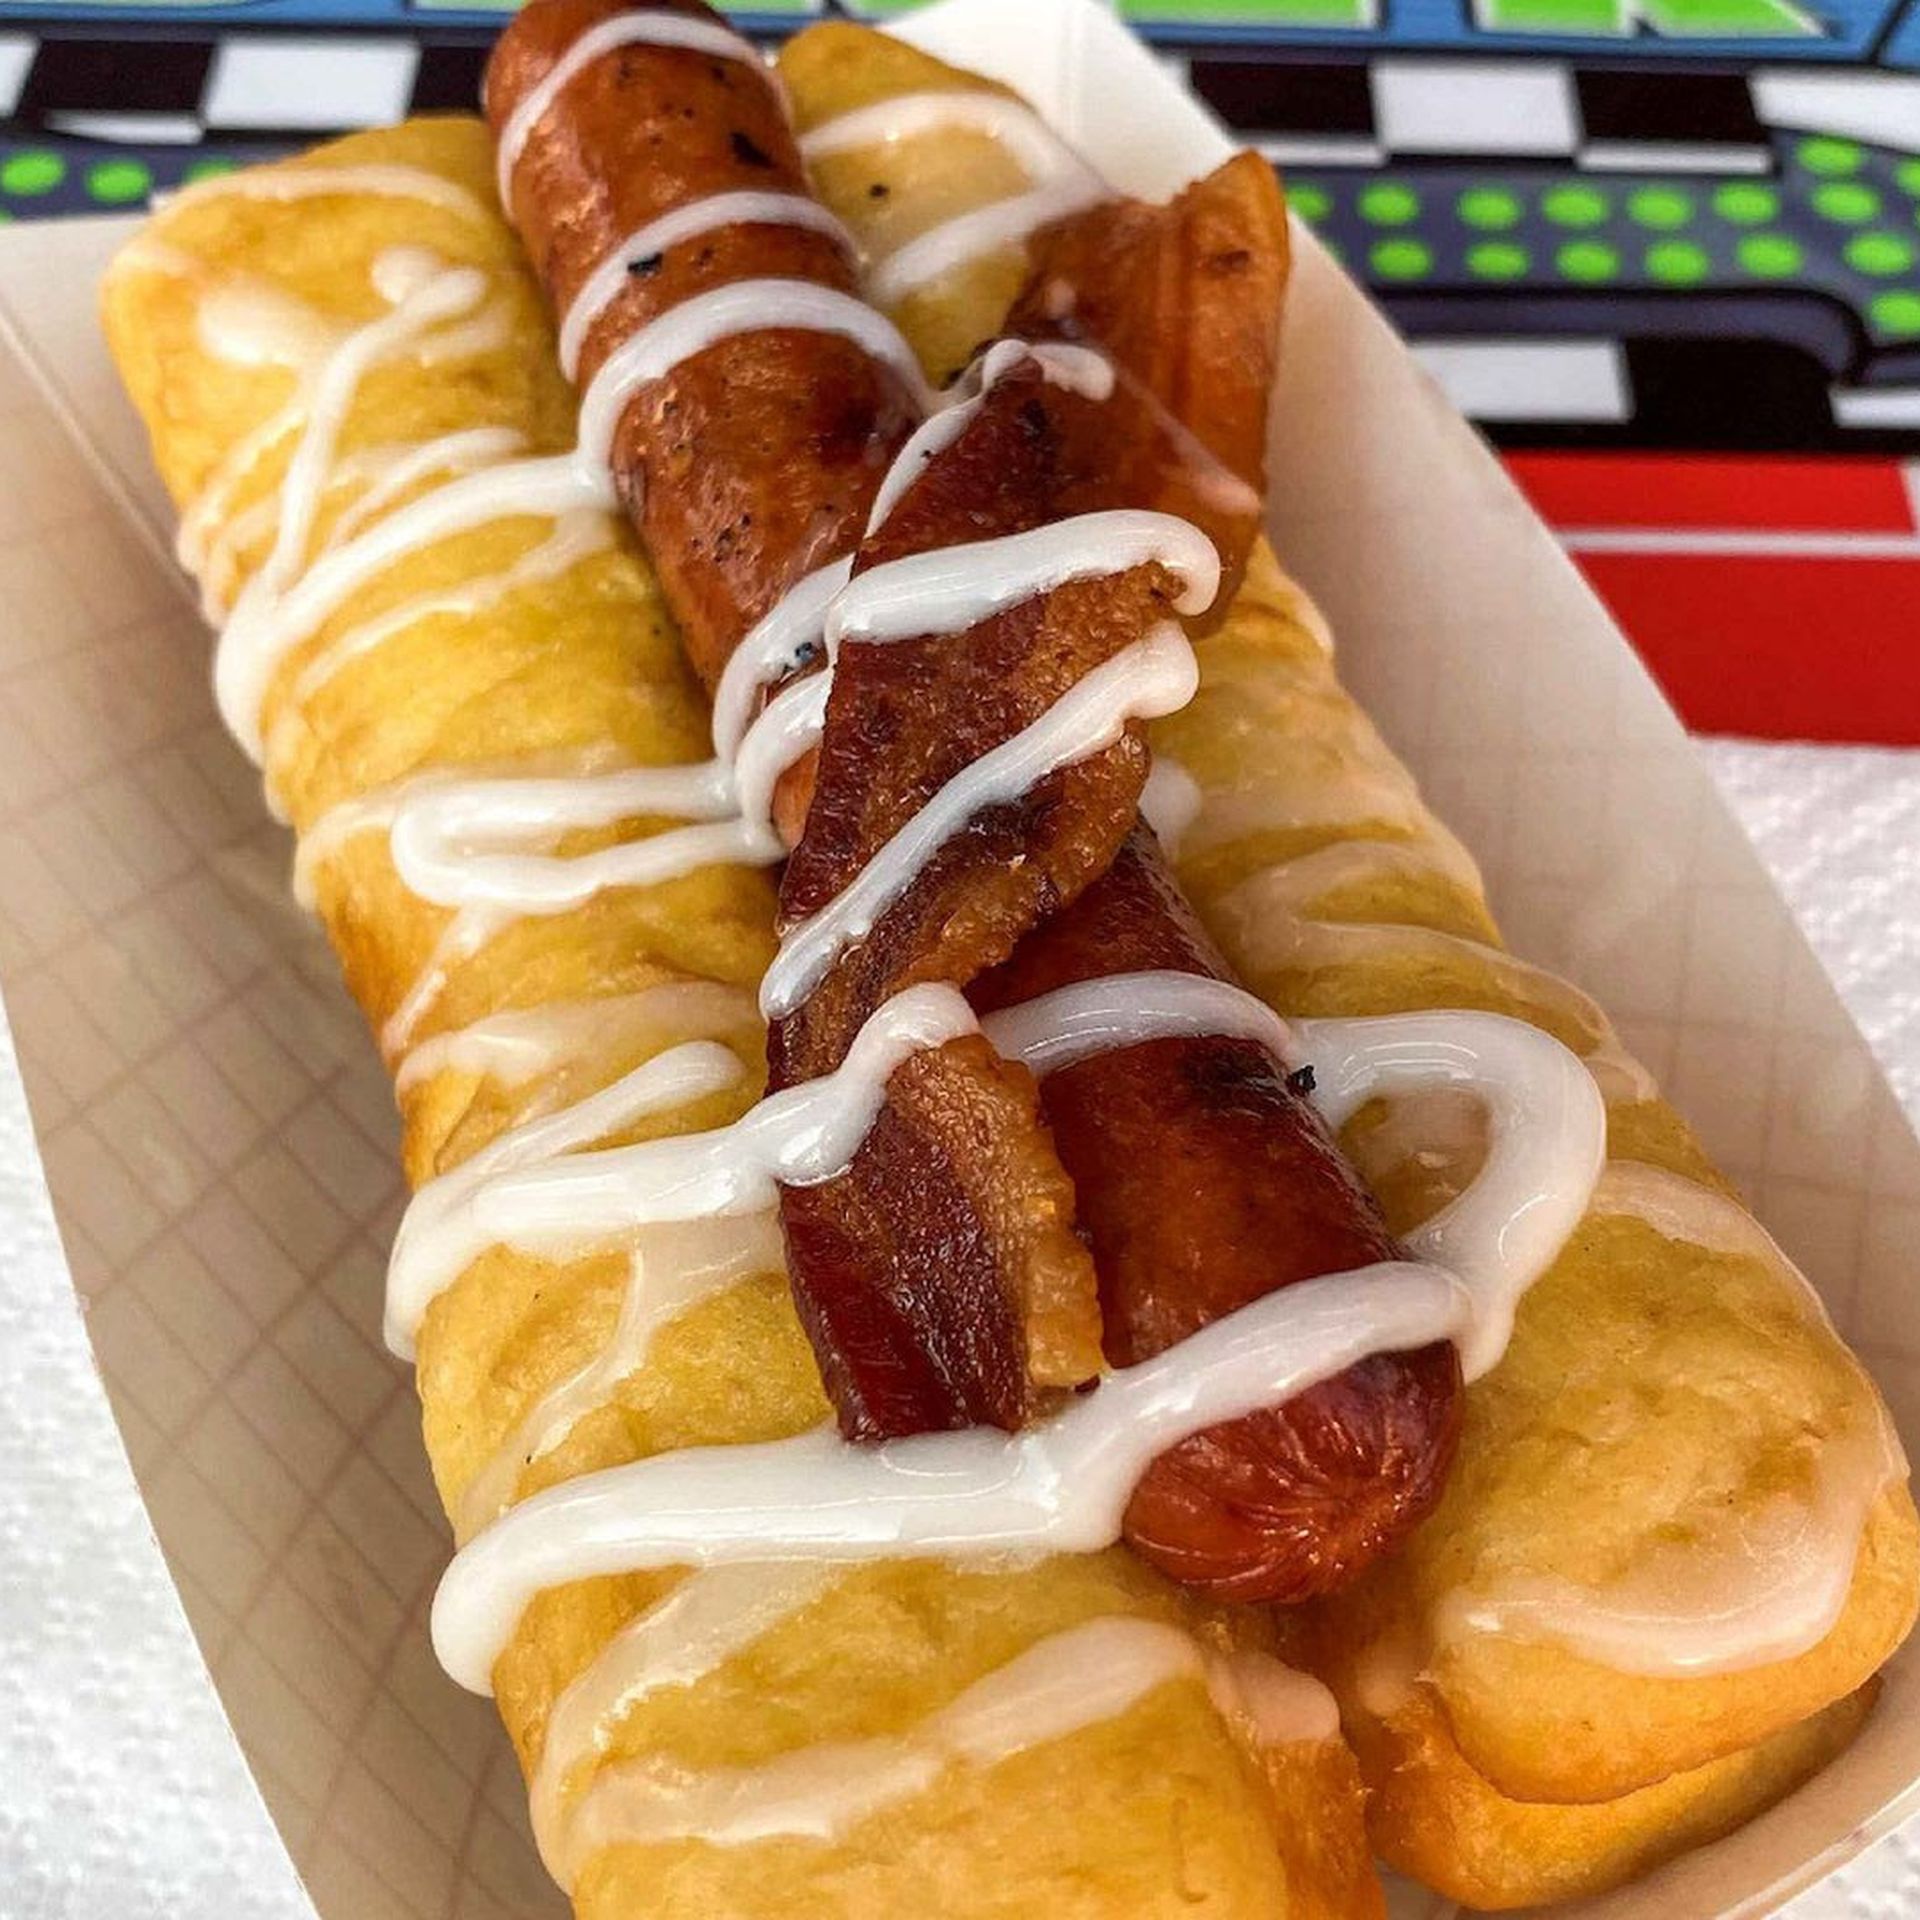  A homemade Long John donut wrapping a grilled all-beef hot dog topped with applewood bacon, all of it drizzled with icing on top.